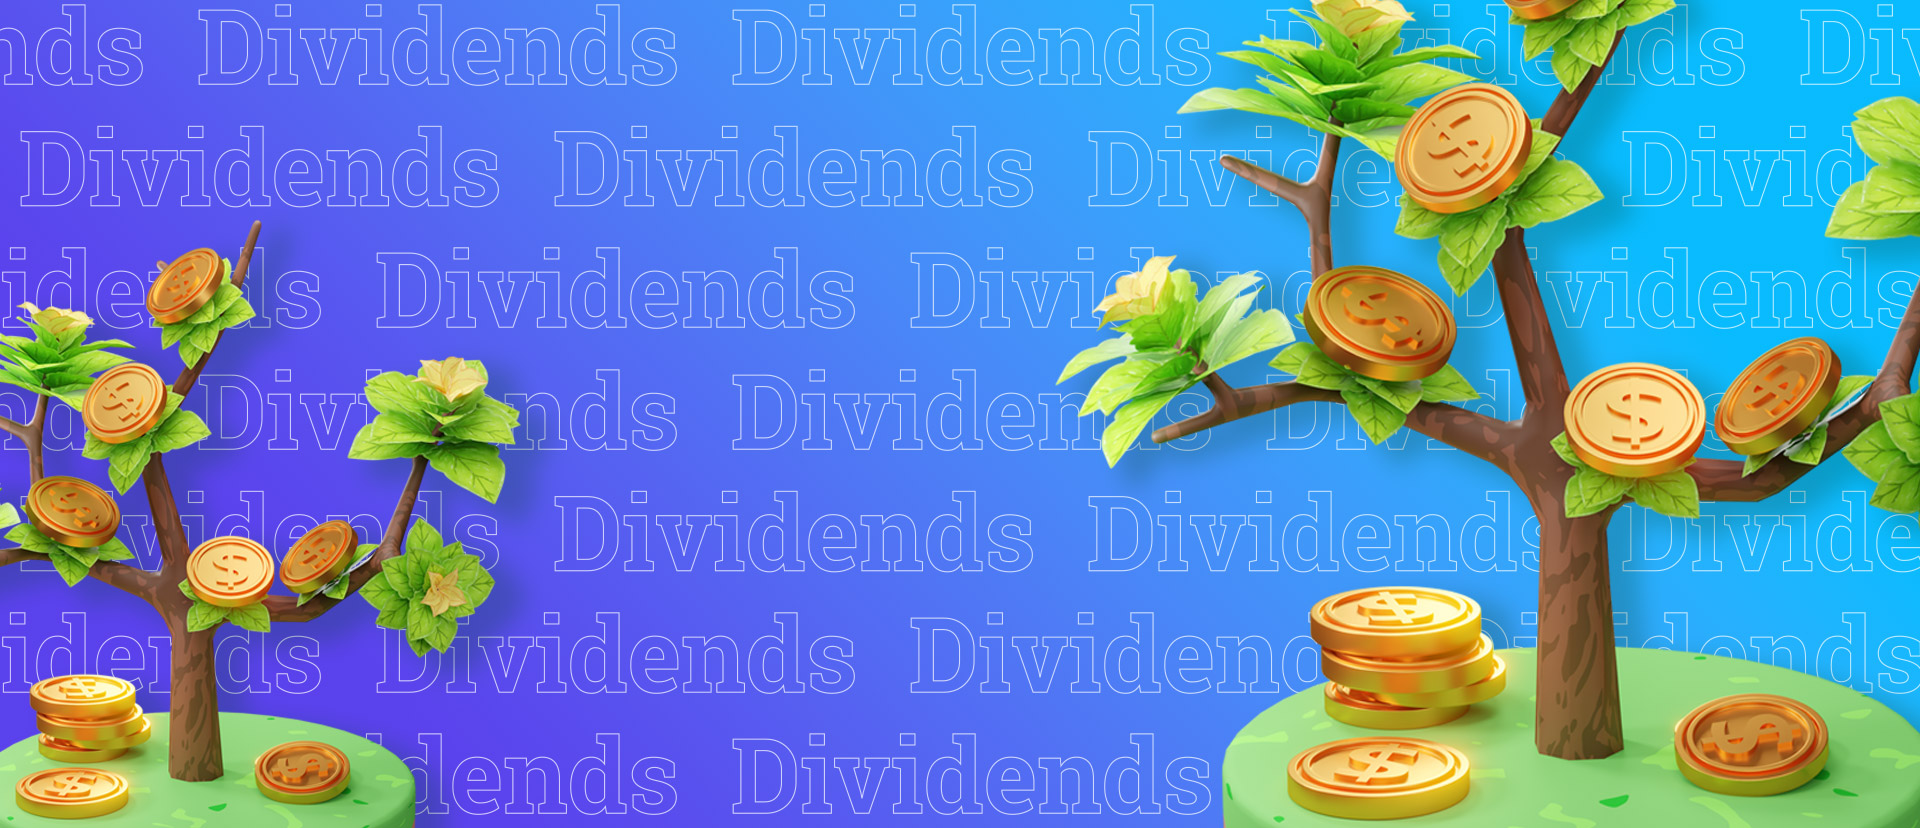 3 Stocks with Dividends Above 6%